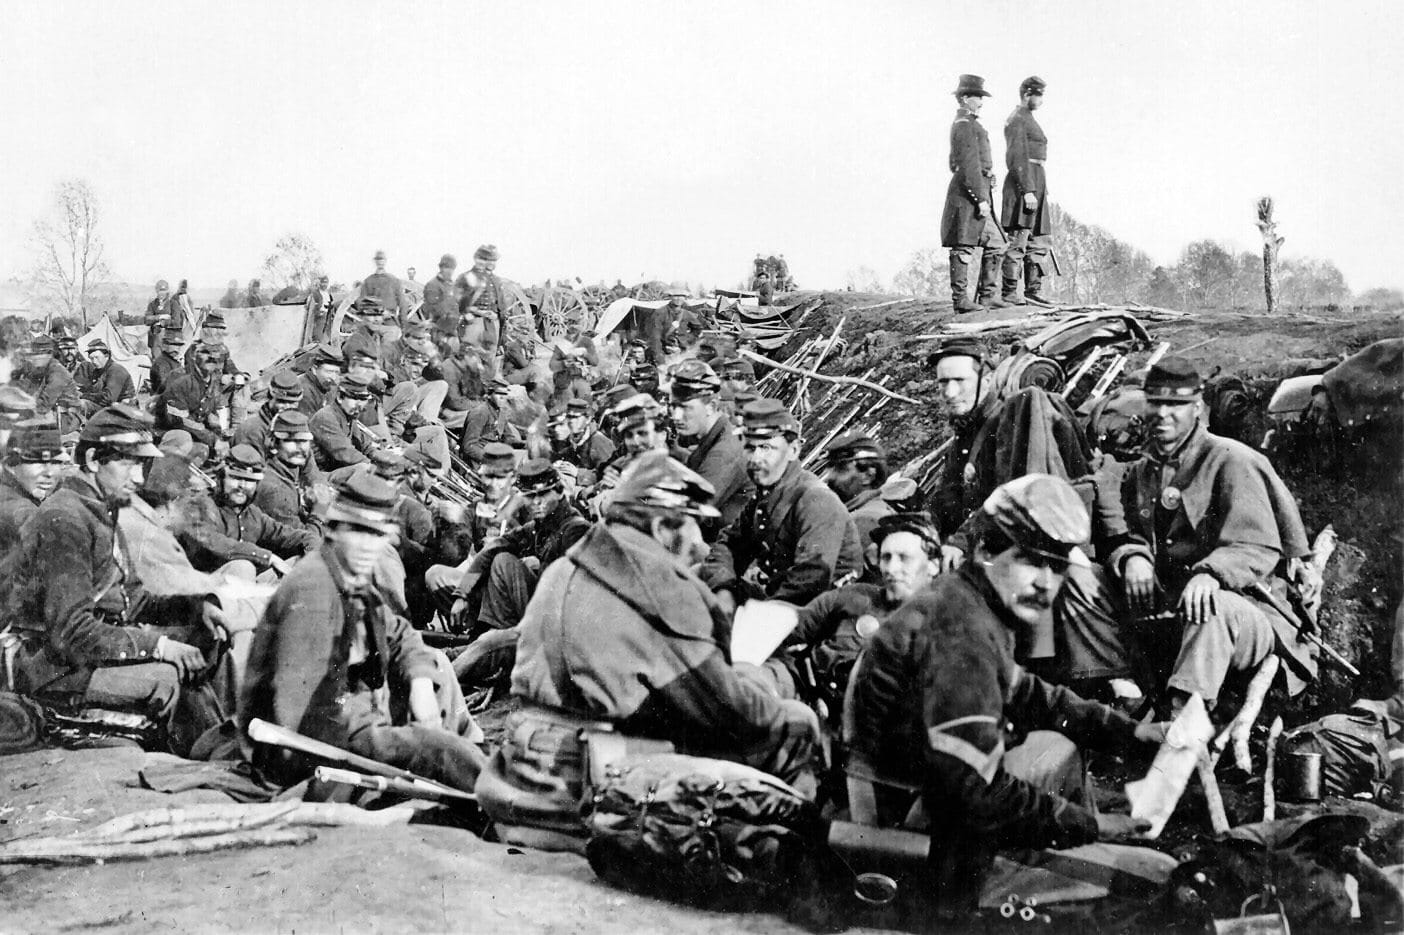 Union soldiers entrenched along the west bank of the Rappahannock River at Fredericksburg in the Battle of Chancellorsville. Photo: A. J. Russell. Public Domain.